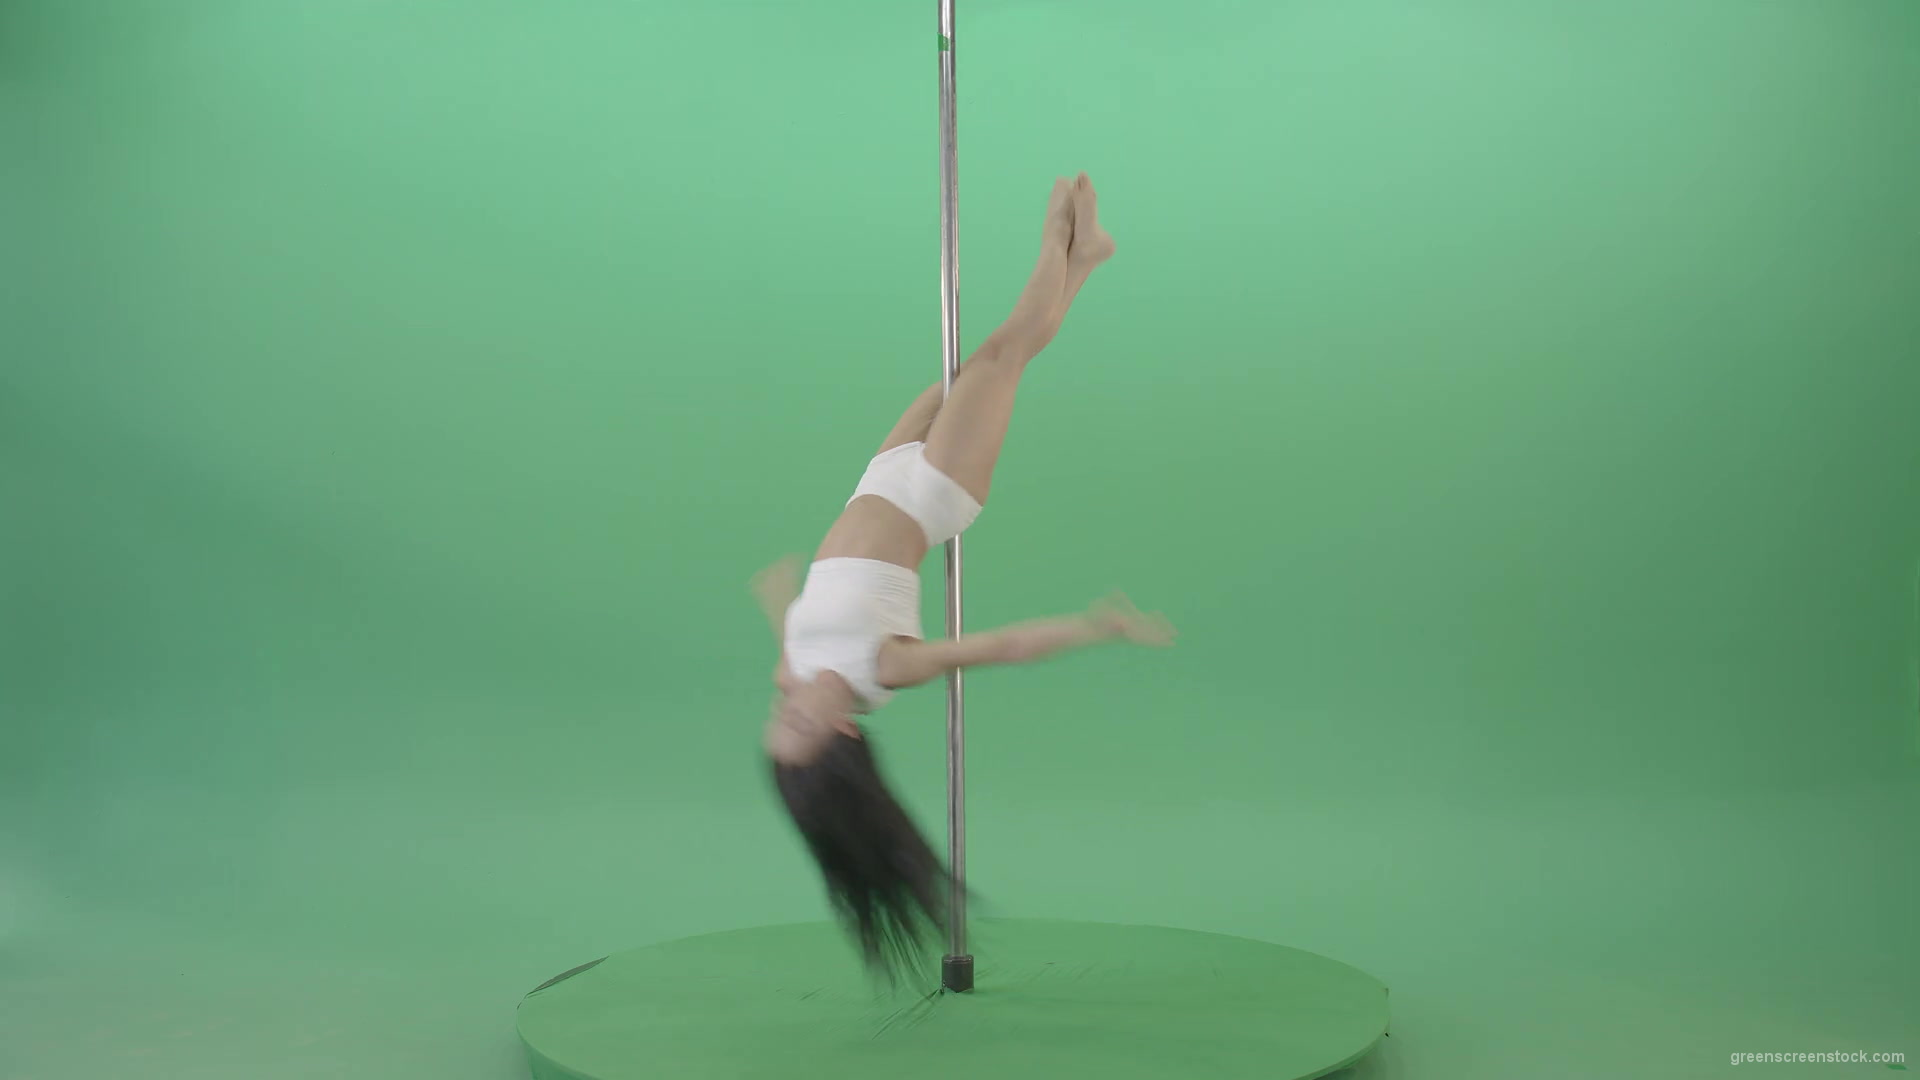 Sport-Fit-Girl-spinning-on-pole-making-acrobatic-element-on-green-screen-1920_008 Green Screen Stock